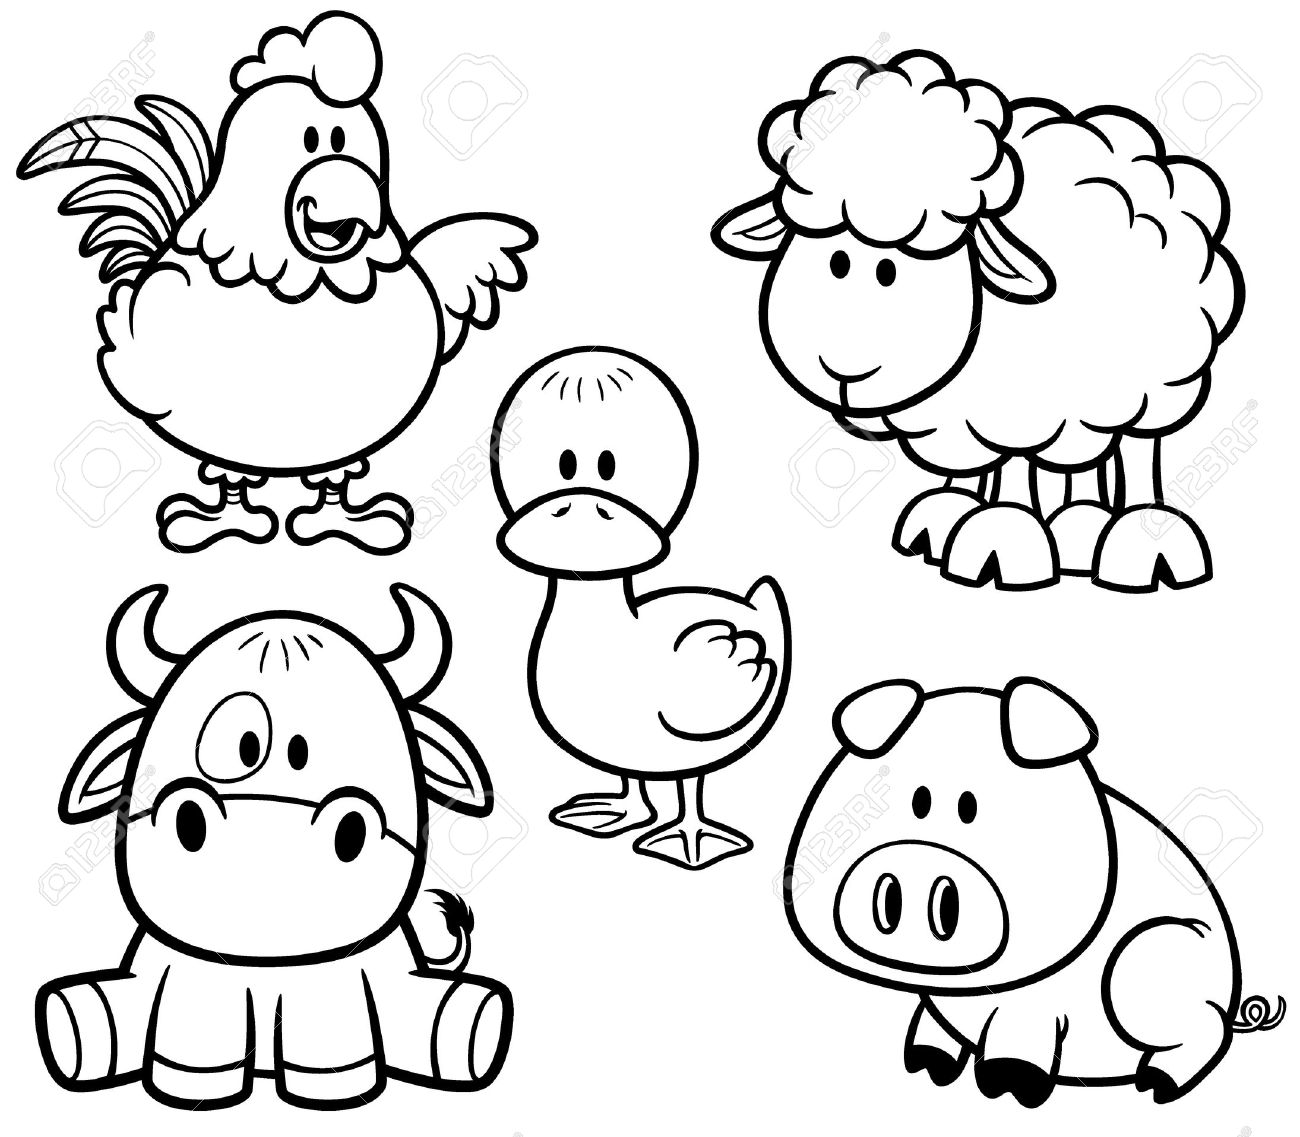 Download Cute Baby Farm Animal Coloring Pages ~ Best Coloring Pages ...